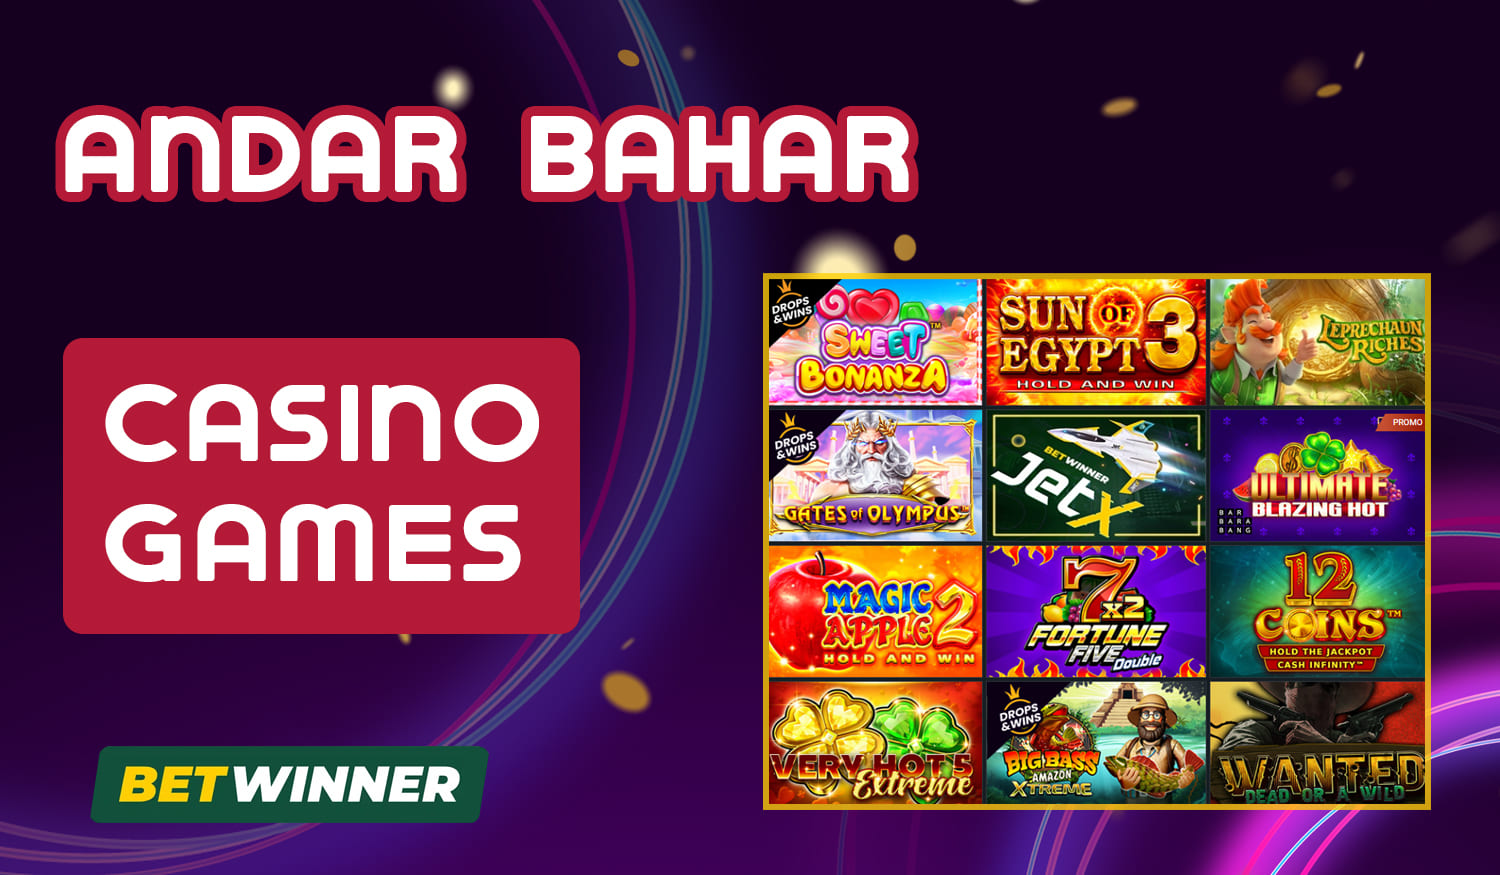 Online casino section games available at BetWinner for Indian players